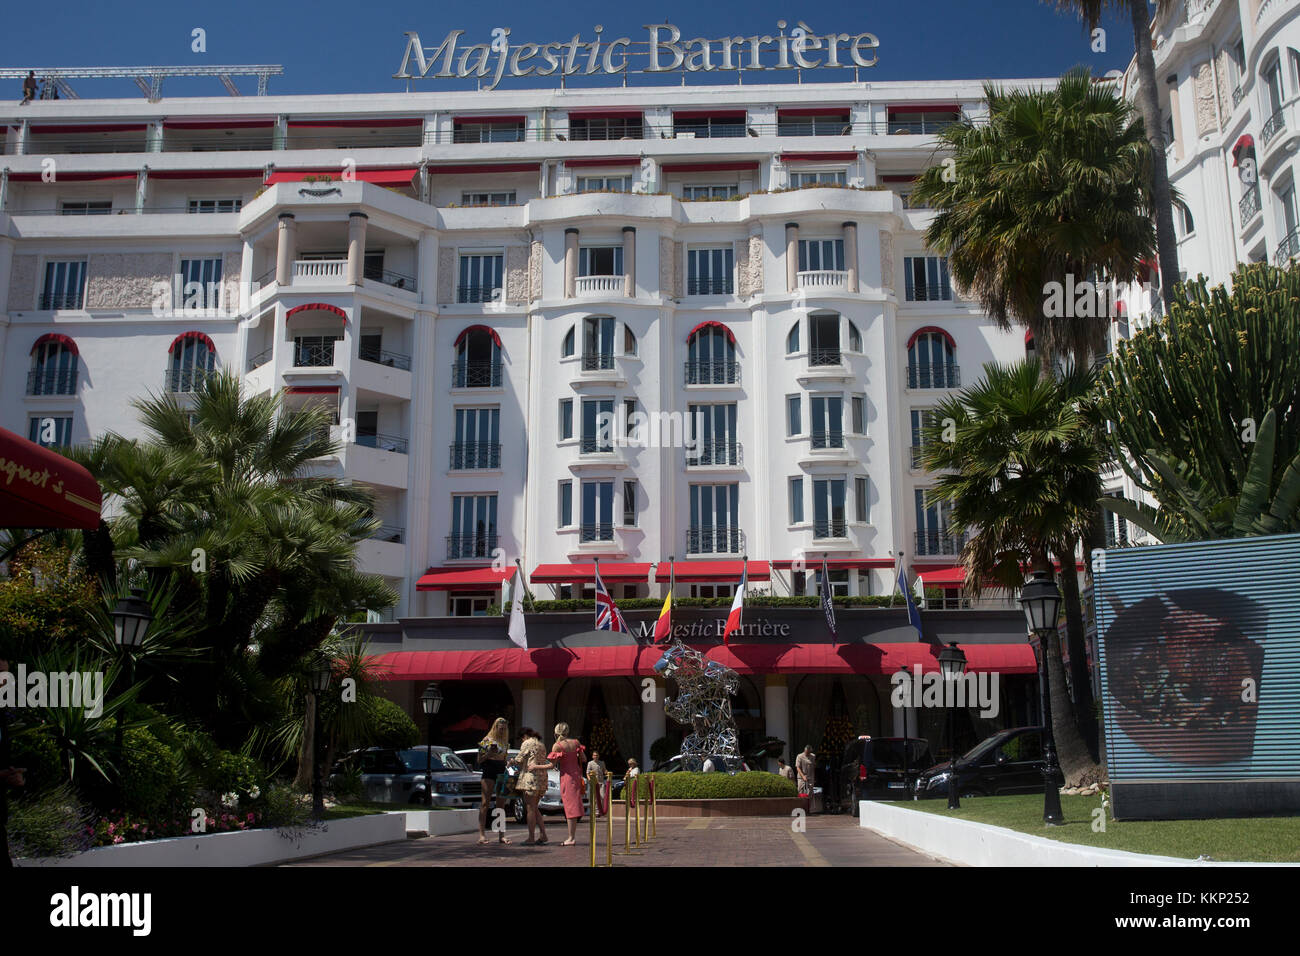 Majestic Barrière Luxury 5 star hotel, Cannes, France Stock Photo